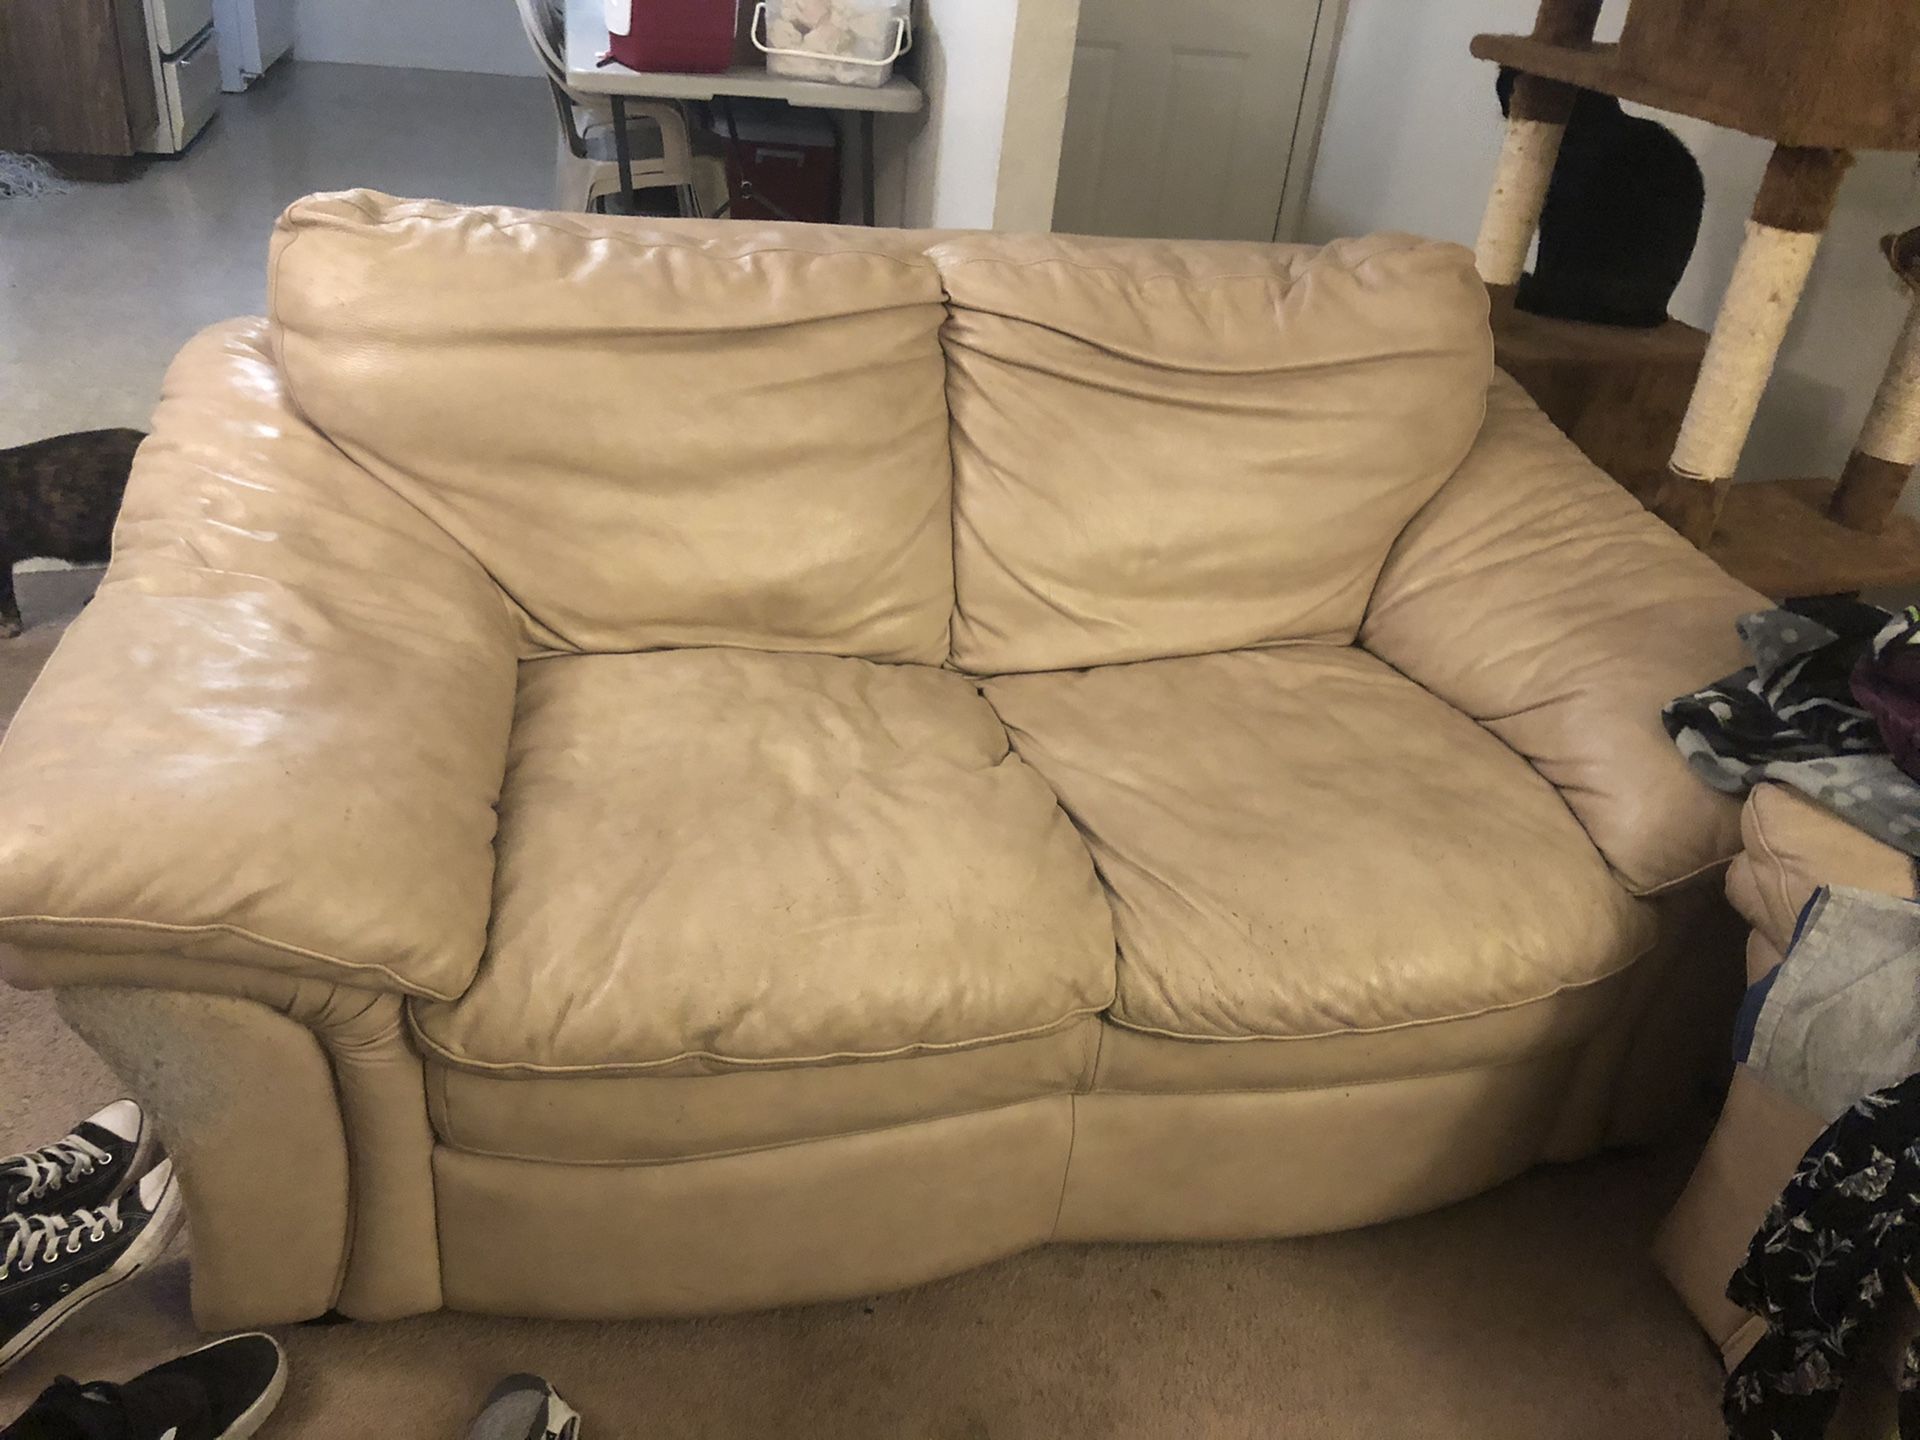 Free couches!